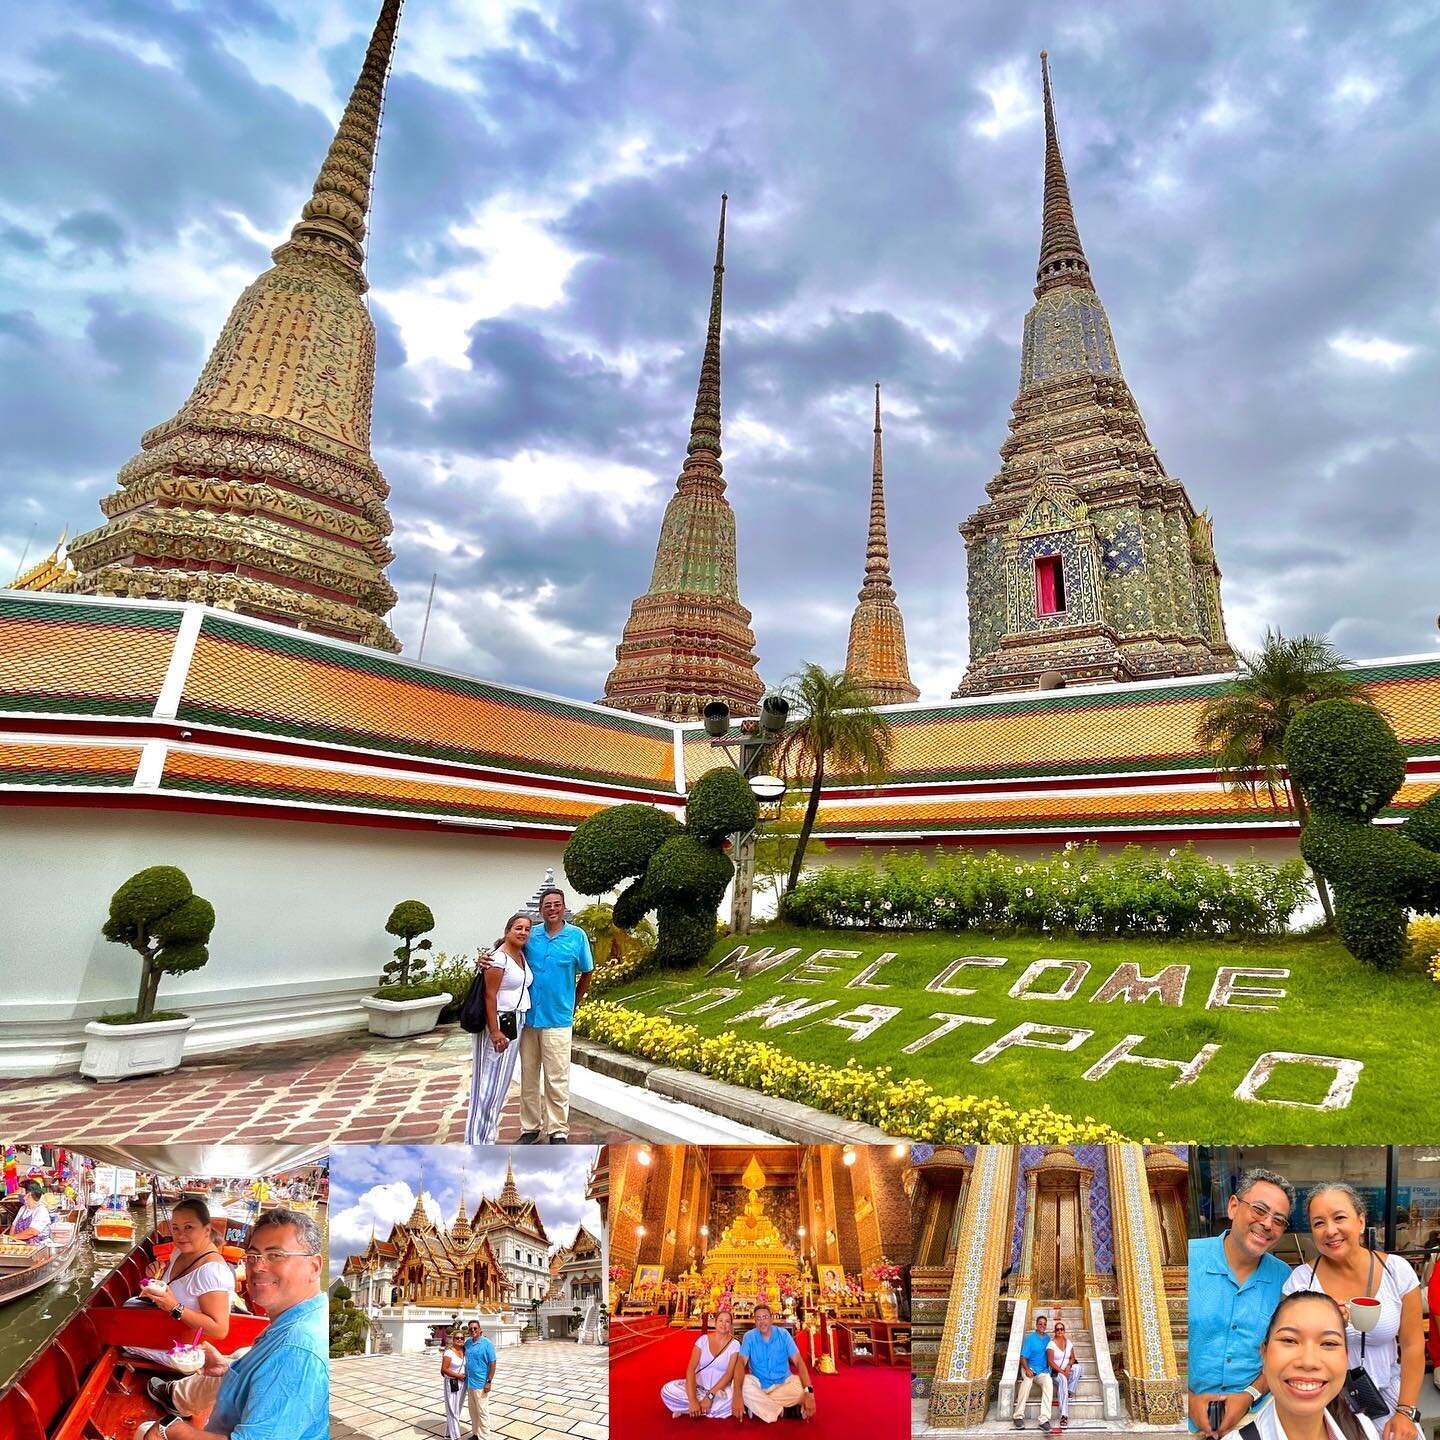 Thank you very much 🙏 Canales Family 🇺🇸 for having me on your day trip for the first time of visiting Bangkok. I hope your family had a great time in Bangkok with our culture, foods and people 🥰🙏

📸 Beautiful photo in Bangkok at
📍The Grand Pal